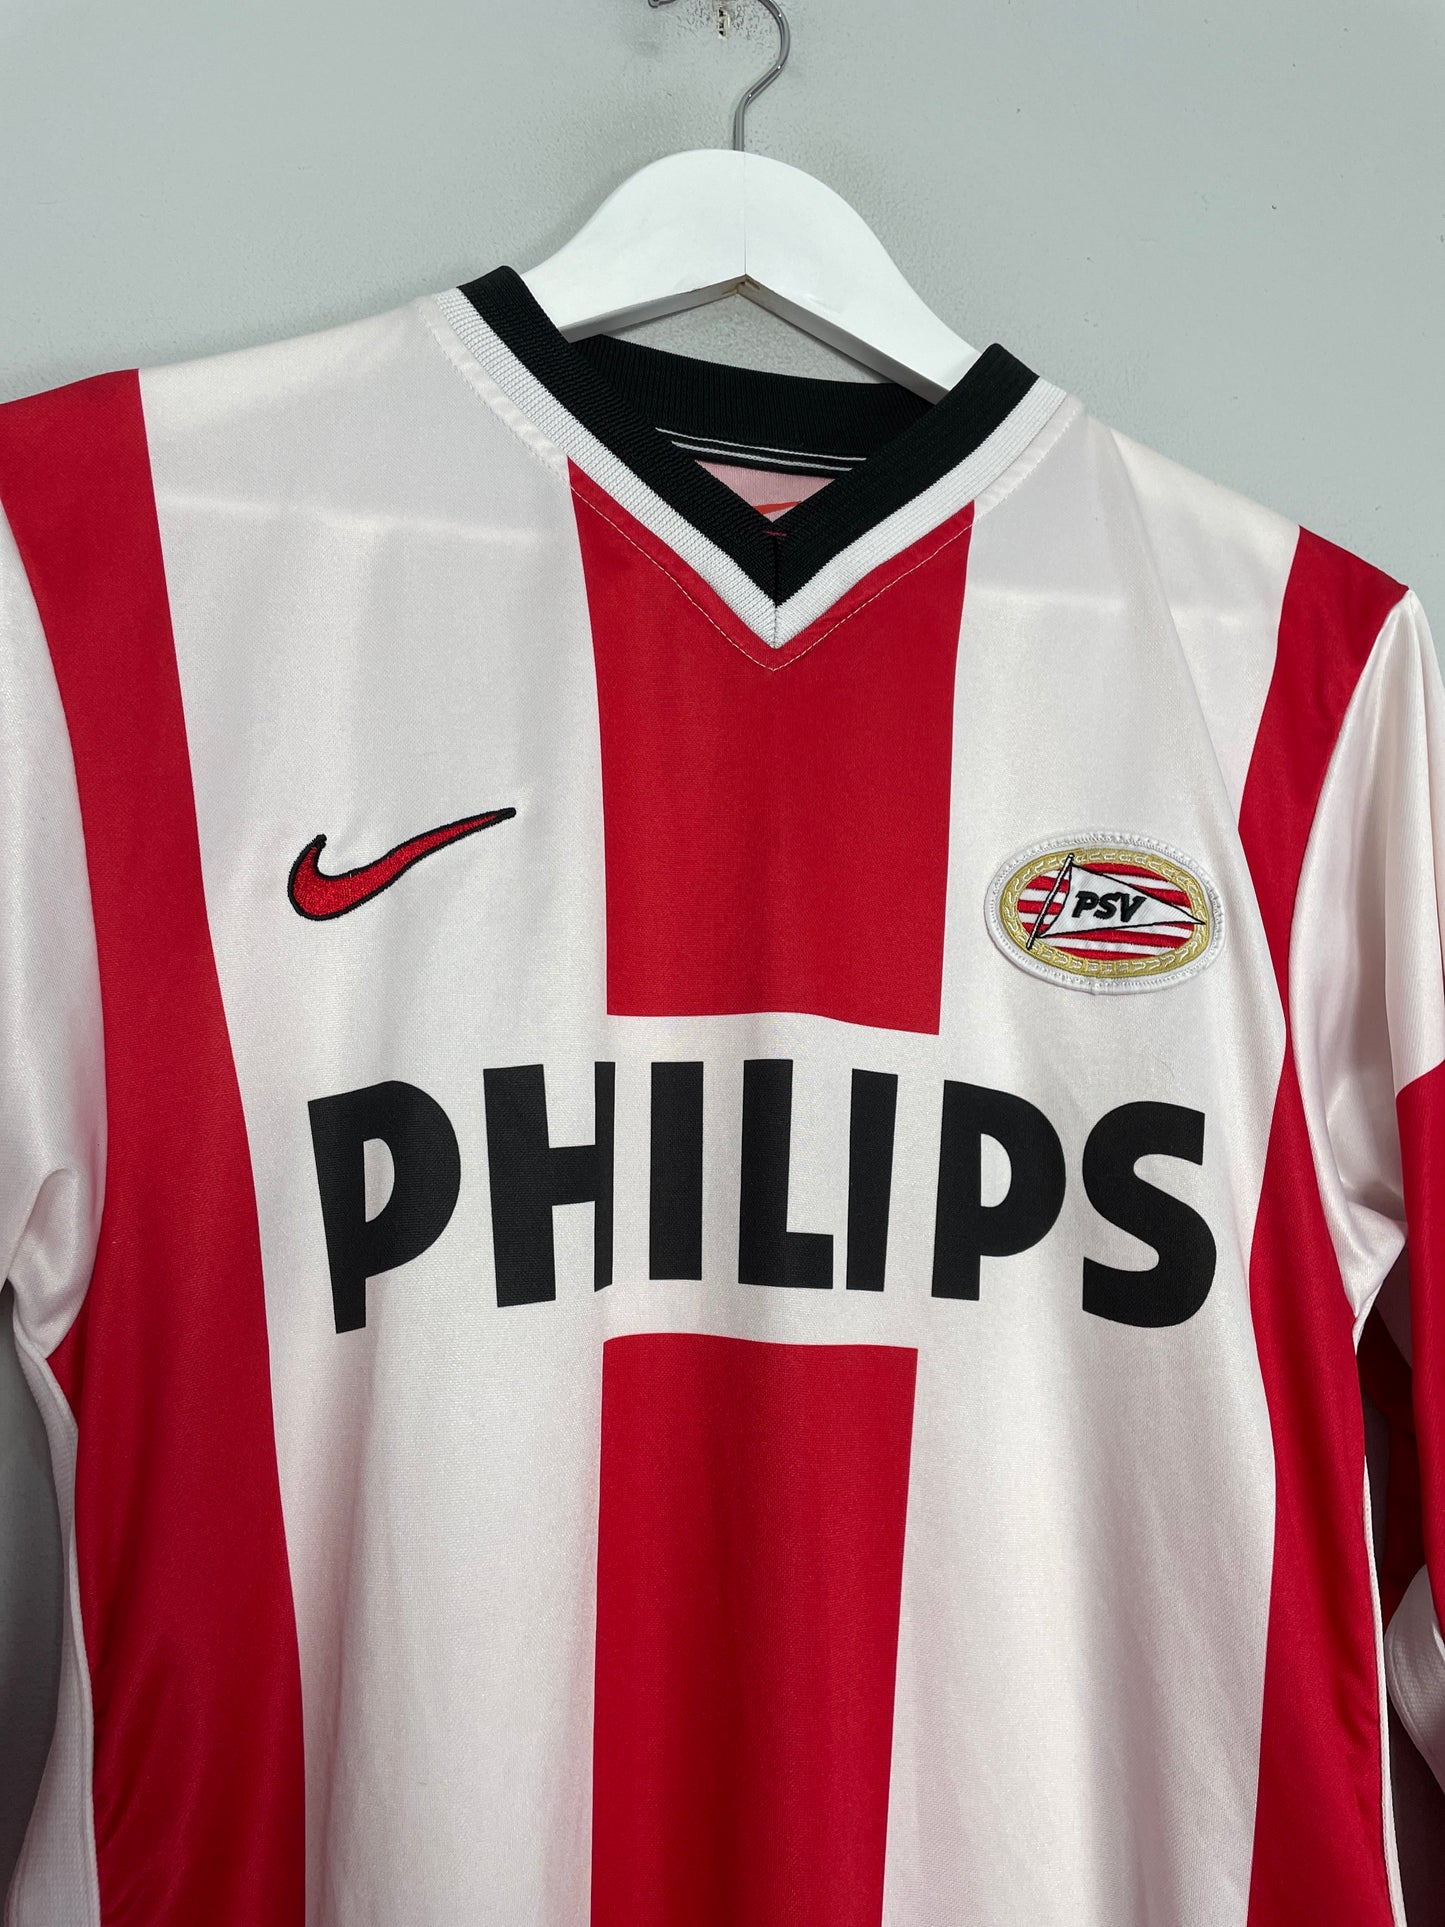 1998/00 PSV #9 L/S *PLAYER ISSUE* HOME SHIRT (S) NIKE